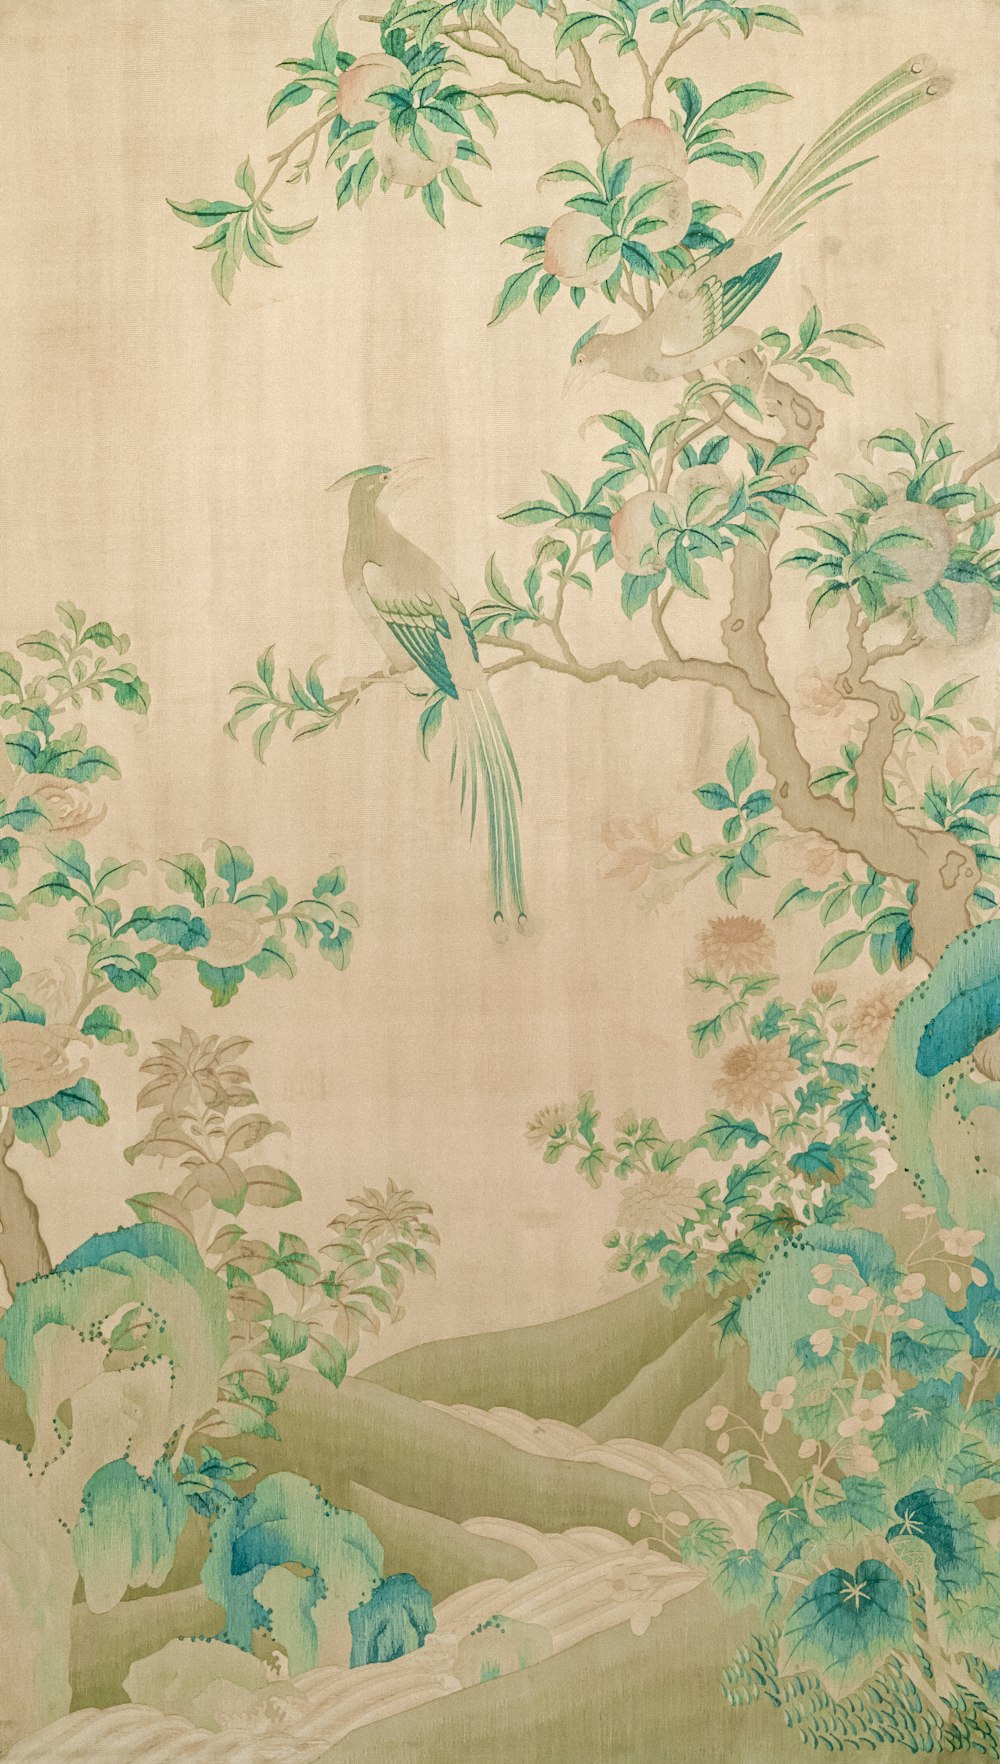 a painting of a bird sitting on a tree branch